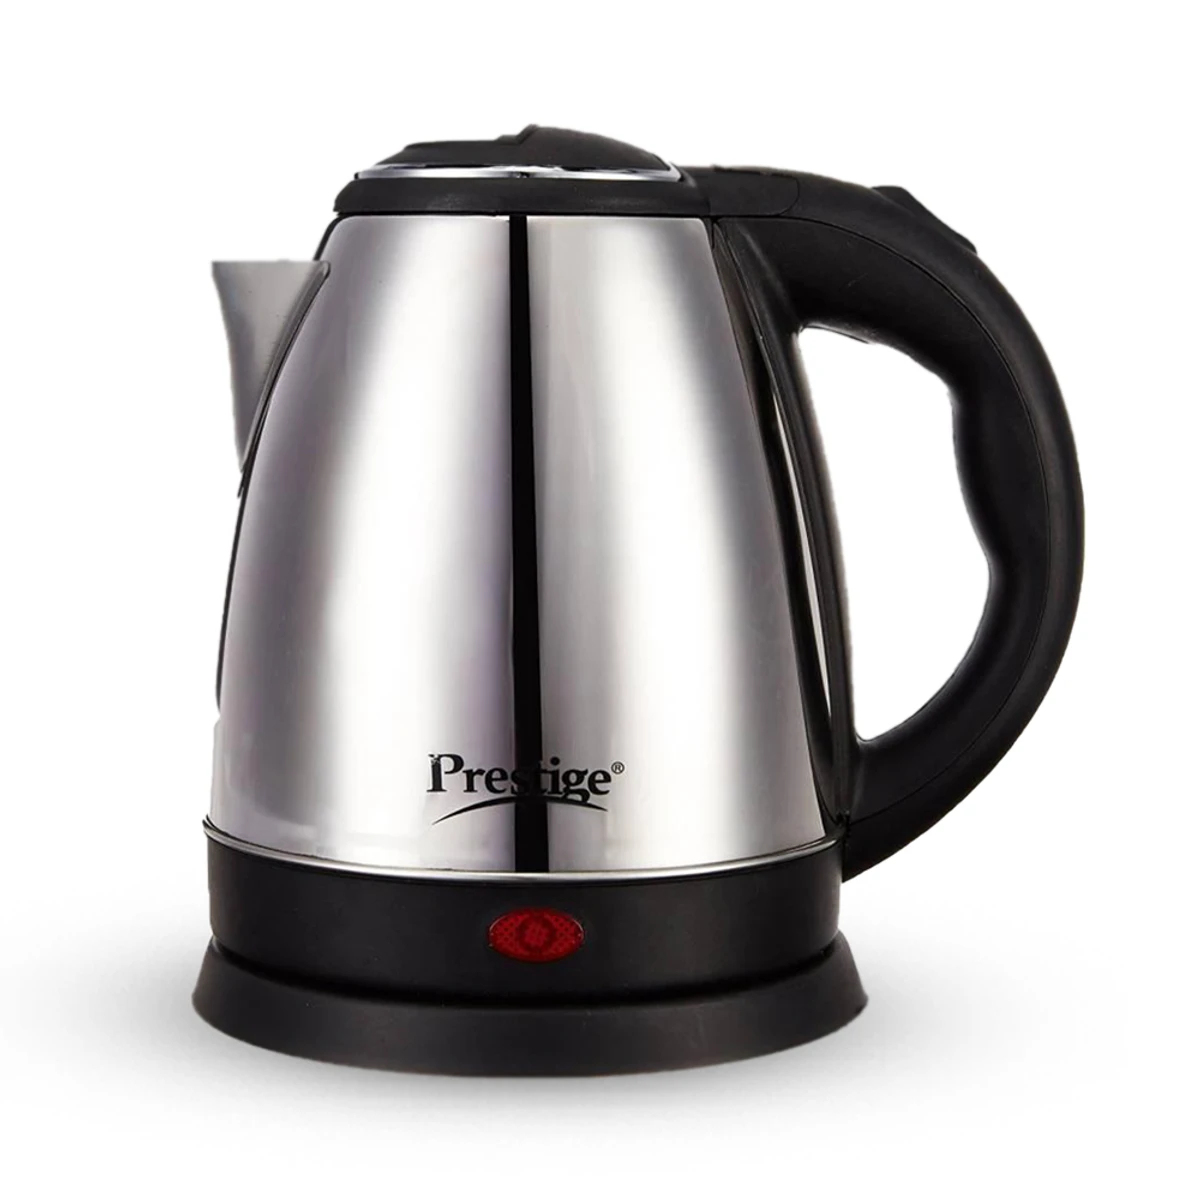 Prestige Electric Kettle - Silver and Black - 1.8 Liter With 4 In 1 Seasoning Box